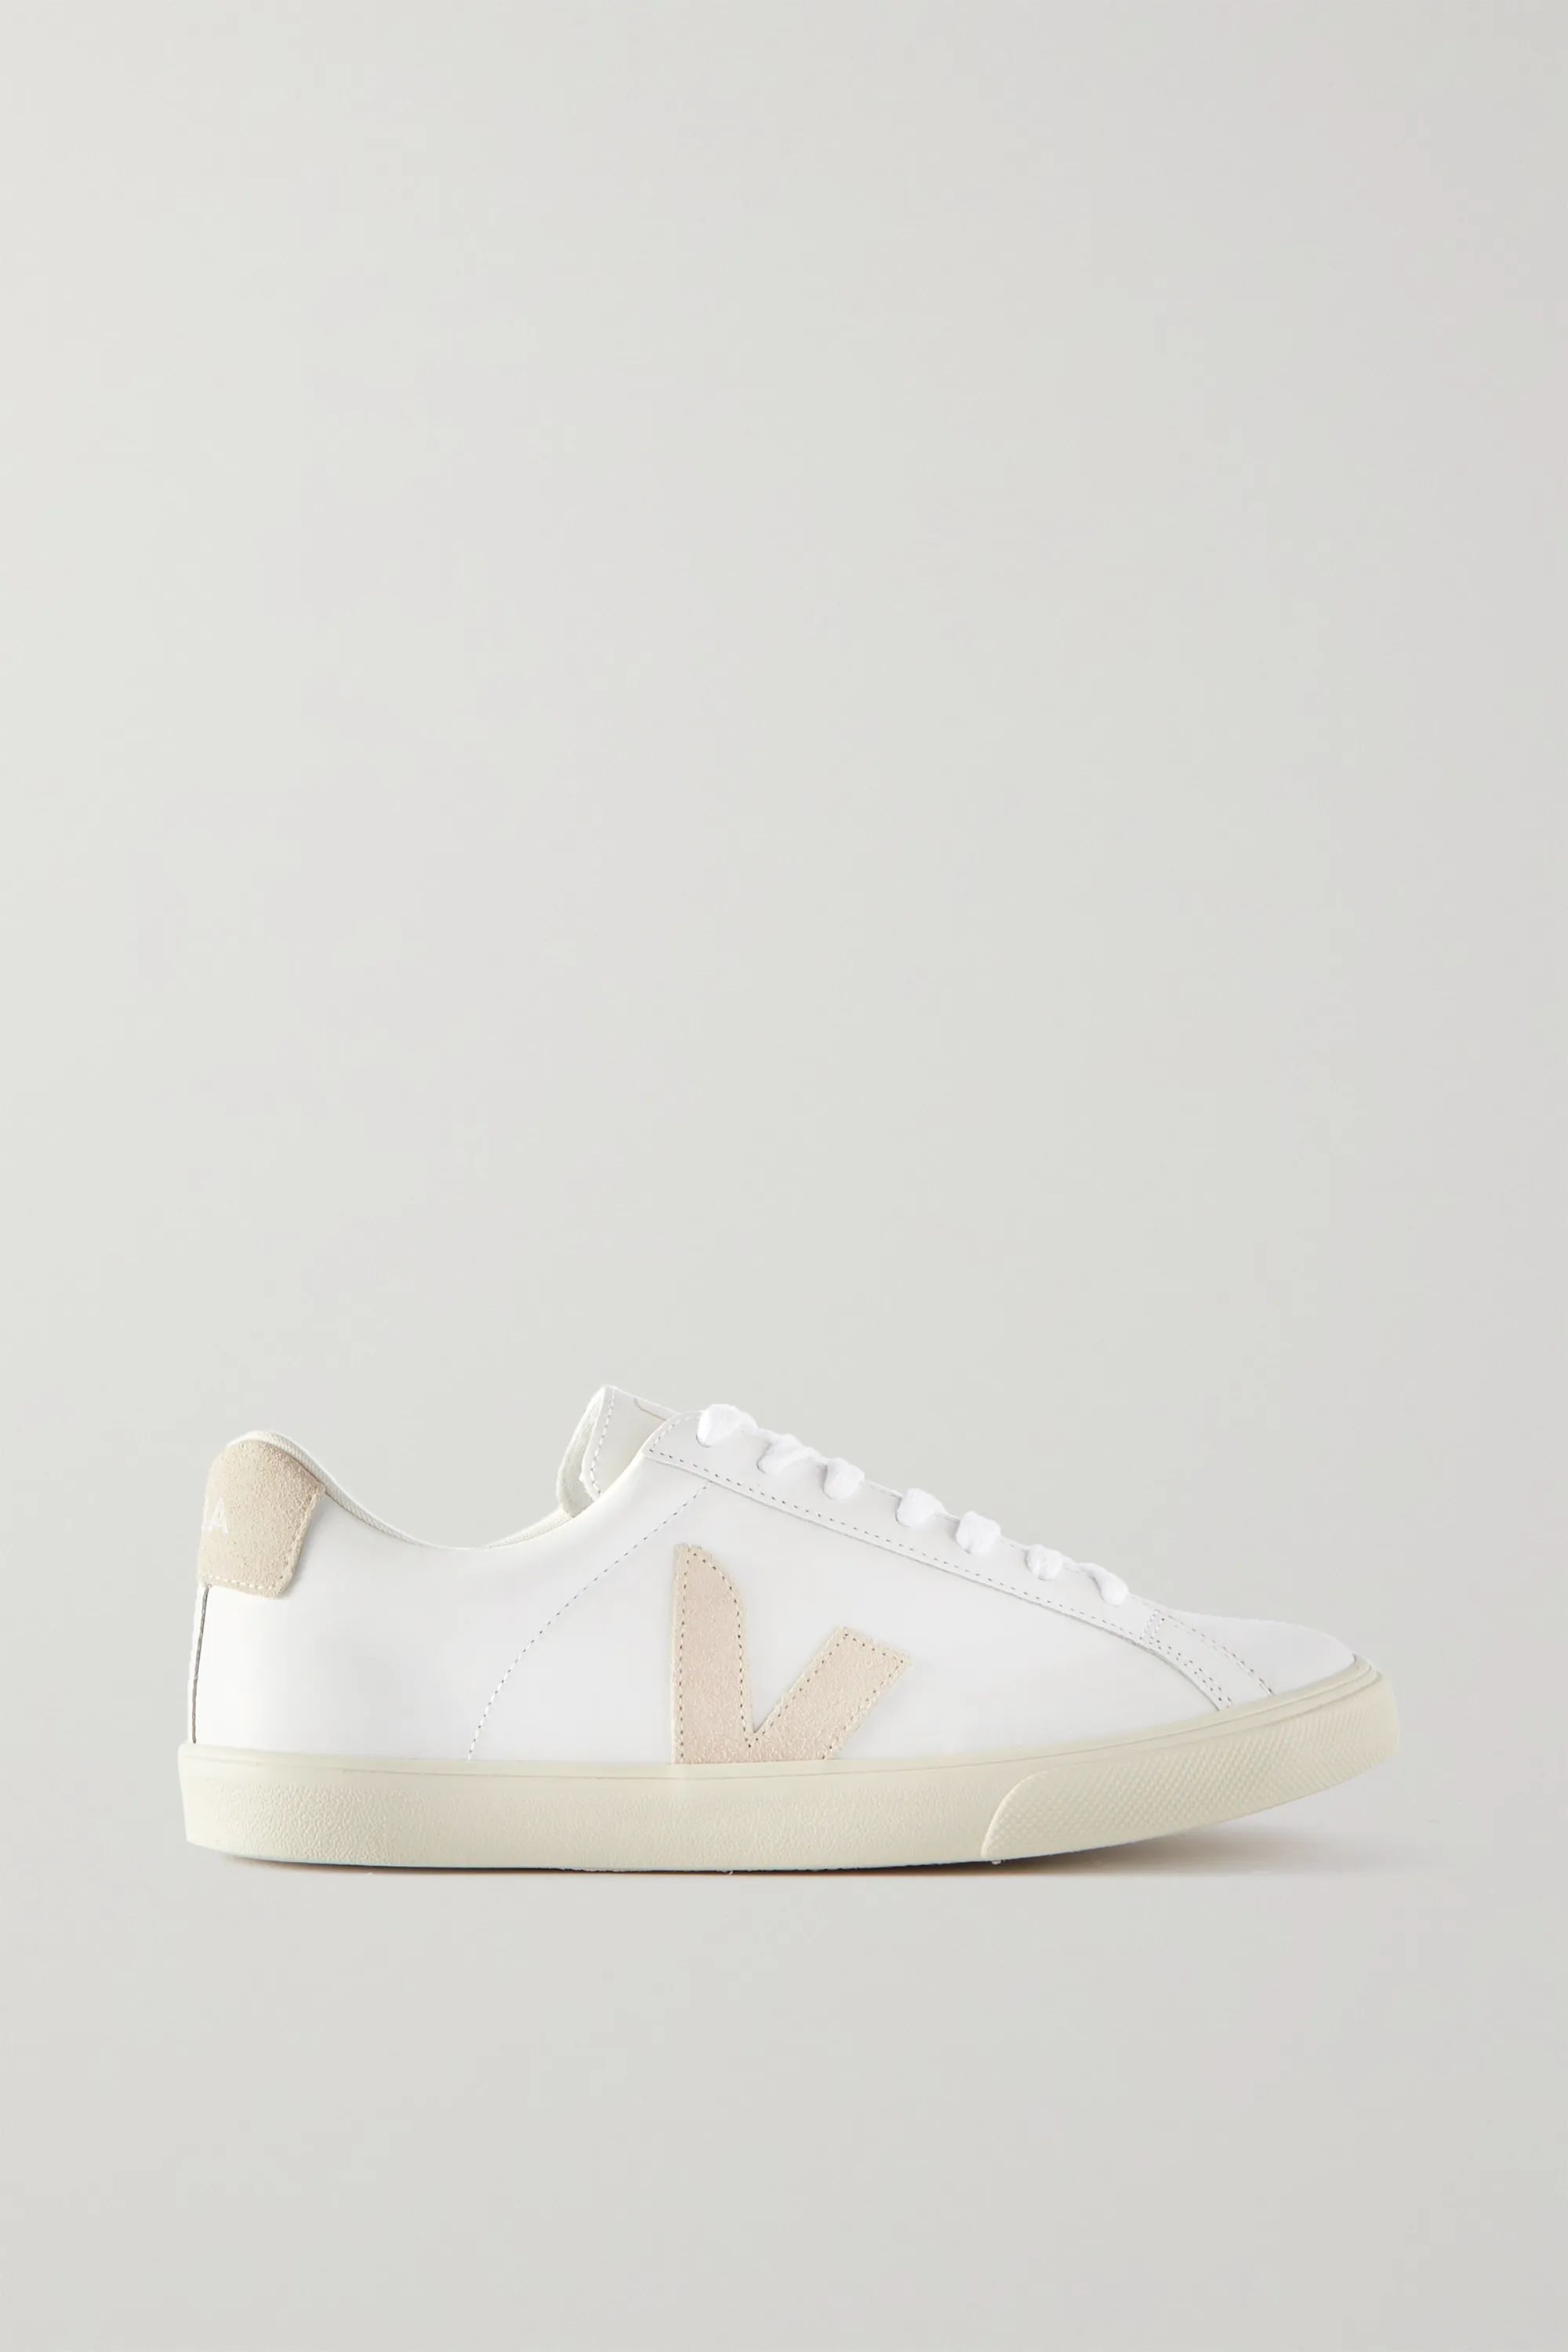 White + NET SUSTAIN Esplar leather and suede sneakers | Veja | NET-A-PORTER | NET-A-PORTER (US)